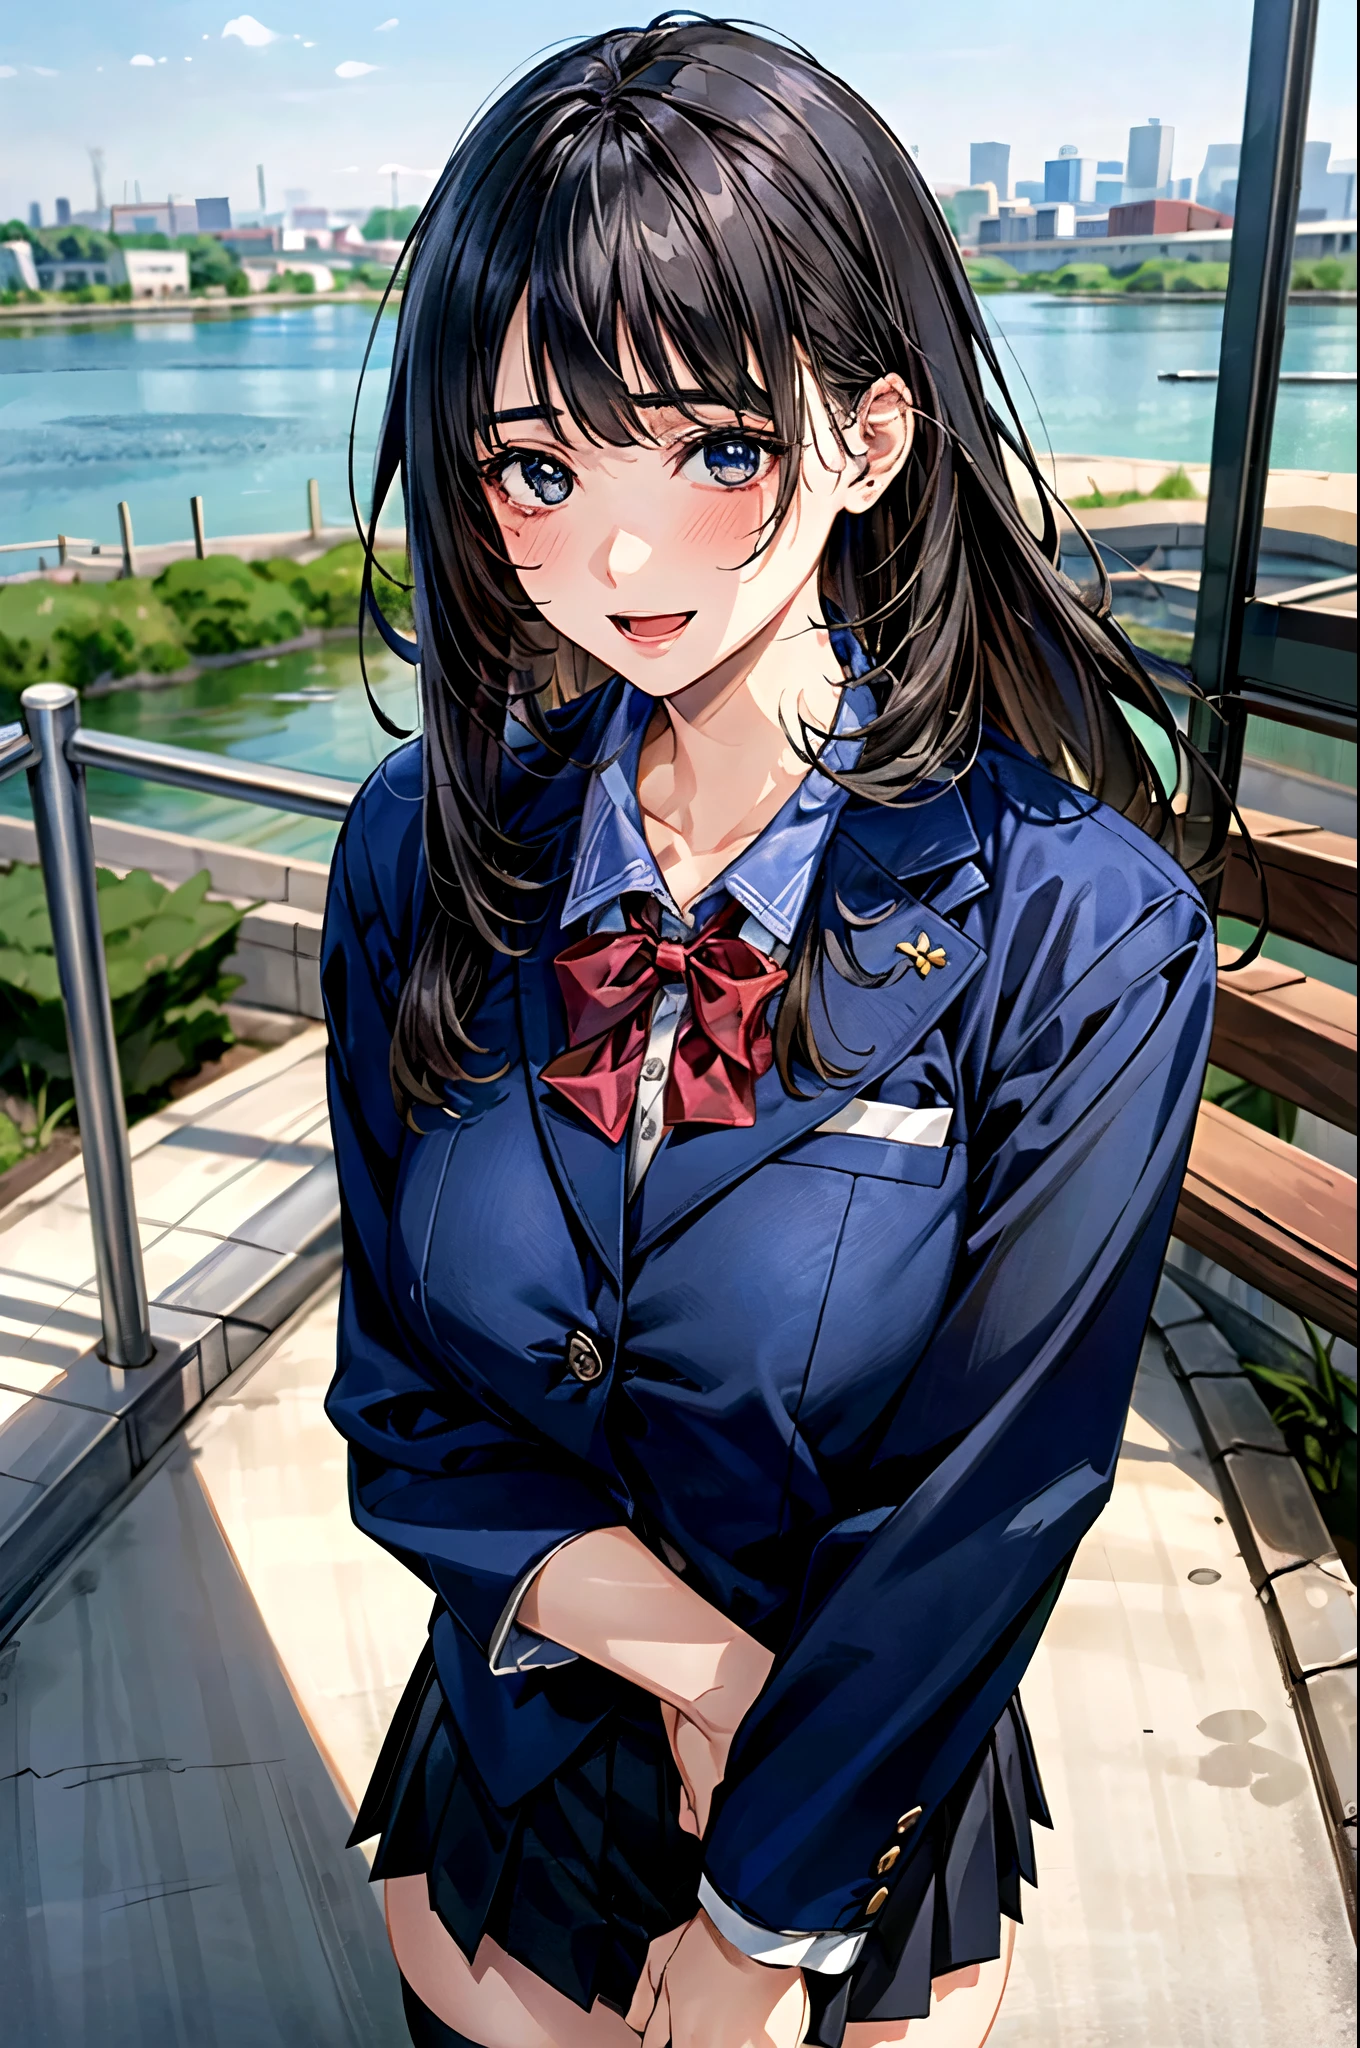 (masterpiece:1.2, top-quality), (realistic, photorealistic:1.4), beautiful illustration, (natural side lighting, movie lighting), , 
looking away, (face focus, upper body, front view:0.6), 1 girl, high school girl, japanese, perfect face, perfect anatomy, cute and symmetrical face, round face, shiny skin, 
(long hair:1.6, long_hime_cut_hairstyle:1.5, black hair), swept bangs, blue eyes, big eyes, long eye lasher, (large breasts, thick thighs, big ass), nipple hardening, 
beautiful hair, beautiful face, beautiful detailed eyes, beautiful clavicle, beautiful body, beautiful chest, beautiful thigh, beautiful legs, beautiful fingers, 
(((navy clothes), school blazer, closed blazer, white collared shirts, navy pleated mini skirt), dark red bow tie, gray thigh-highs), 
(beautiful scenery), depth of field, morning, (riverside, cityscape in the distance), standing, hands on own chest, (lovely smile, open mouth), 